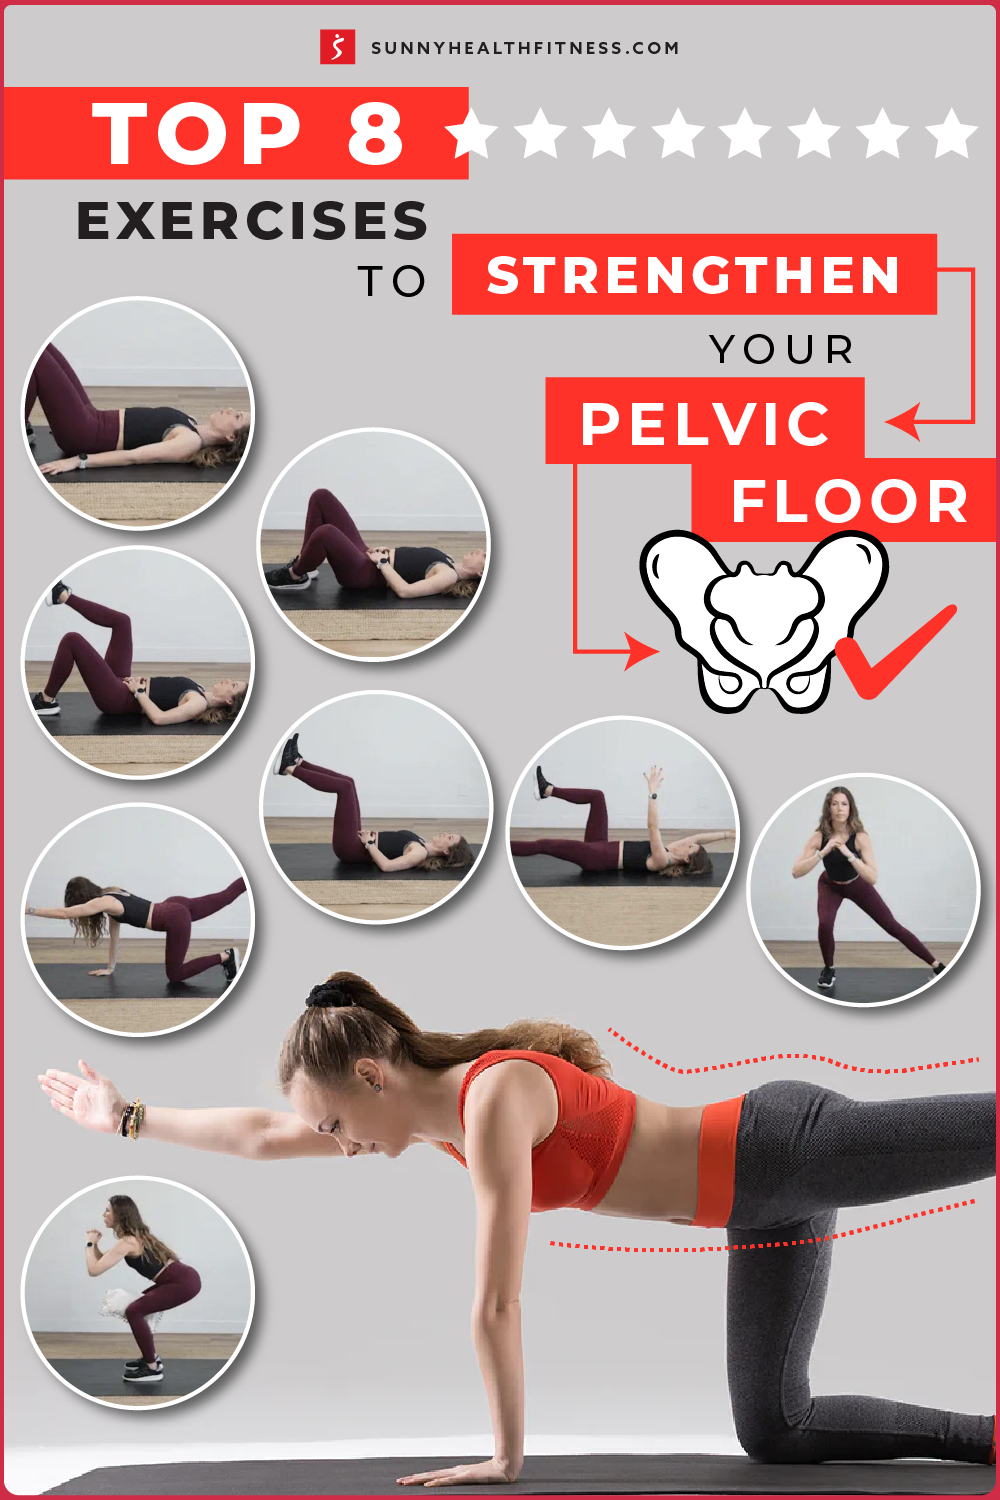 Pelvic Floor 101: The 5 Best Exercises to Try